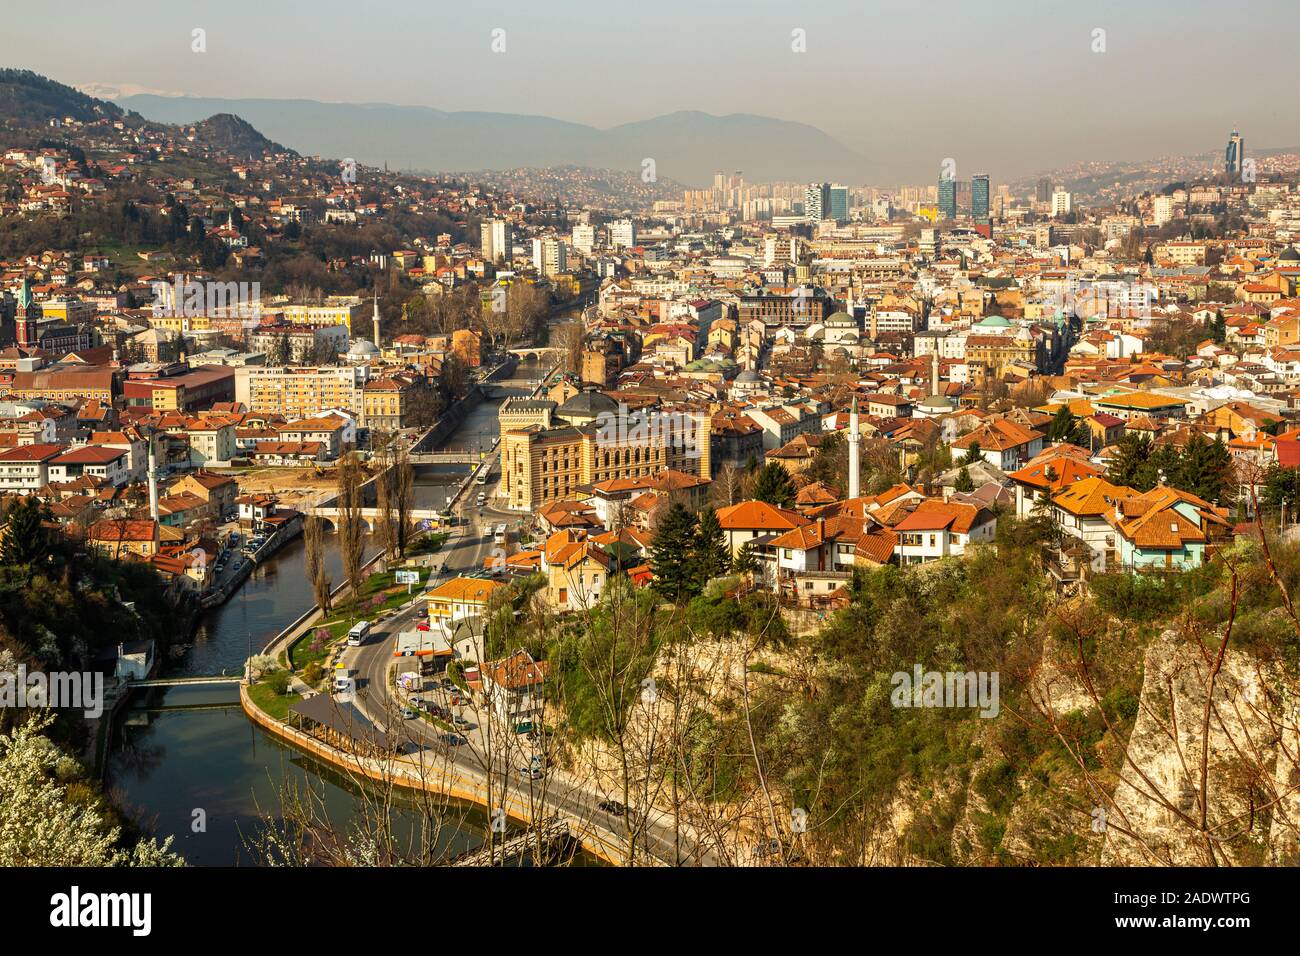 An elevated aerial view daytime view of Sarajevo, capital of Bosnia and Herzegovina surrounded by the Dinaric Alps and the Miljacka River in view Stock Photo